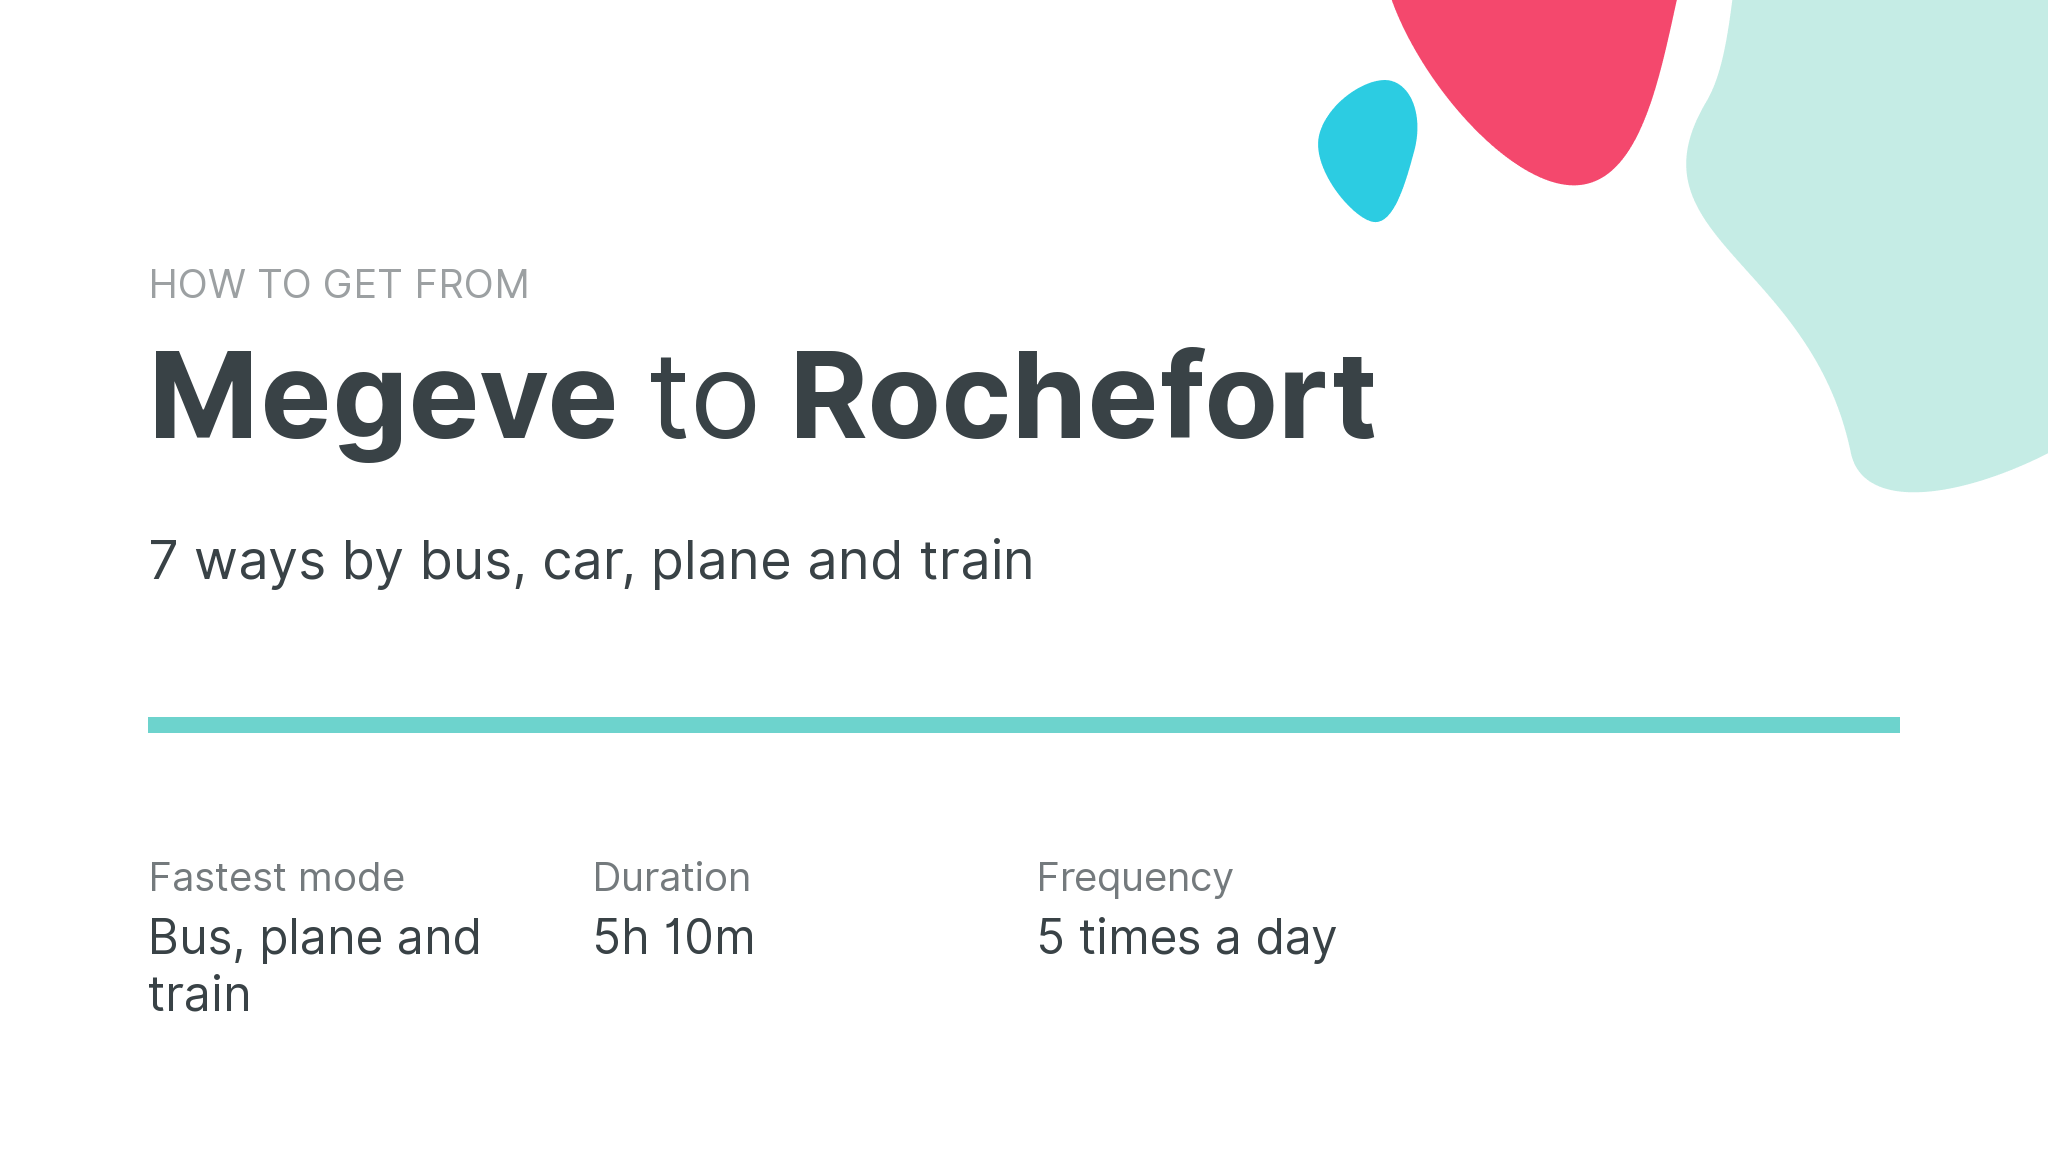 How do I get from Megeve to Rochefort